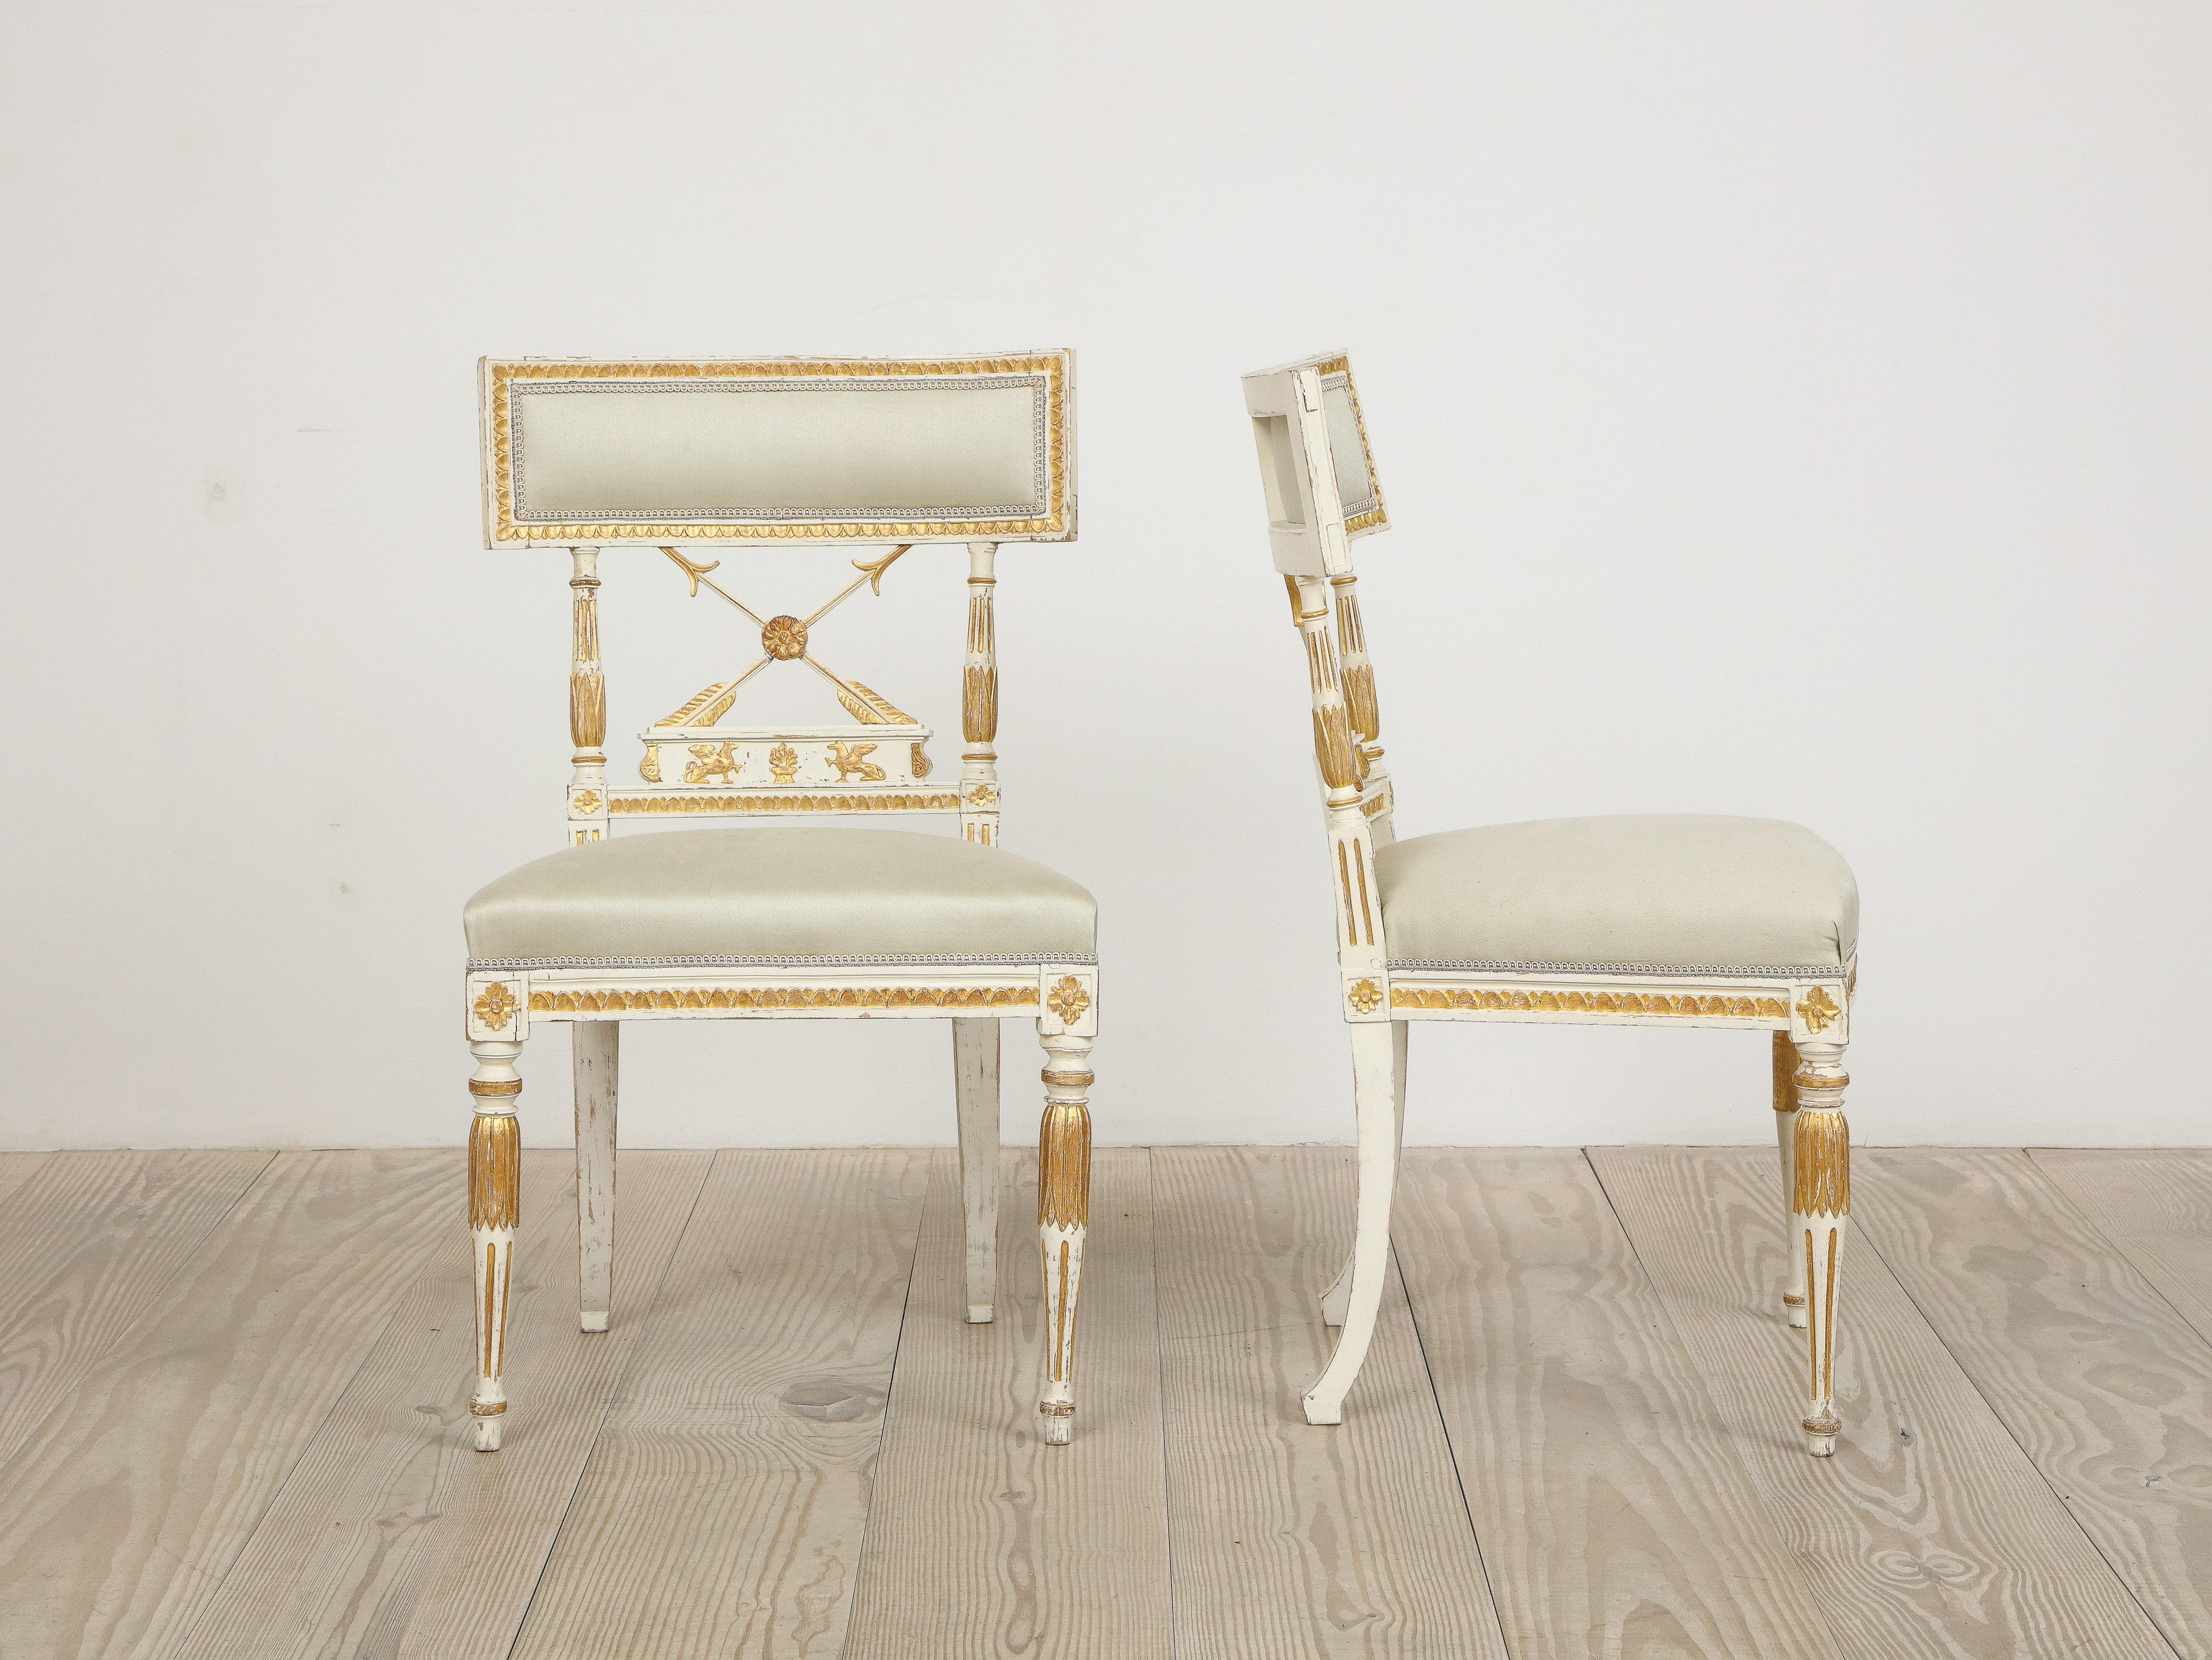 Ephraim Ståhl (1767 Stockholm 1820),  fine pair of Late Gustavian / Early Empire Chairs with intersecting arrows with centered rosettes, griffin motif and fluted legs, origin: Stockholm, Sweden, circa 1800, reupholstered in linen sateen fabric by